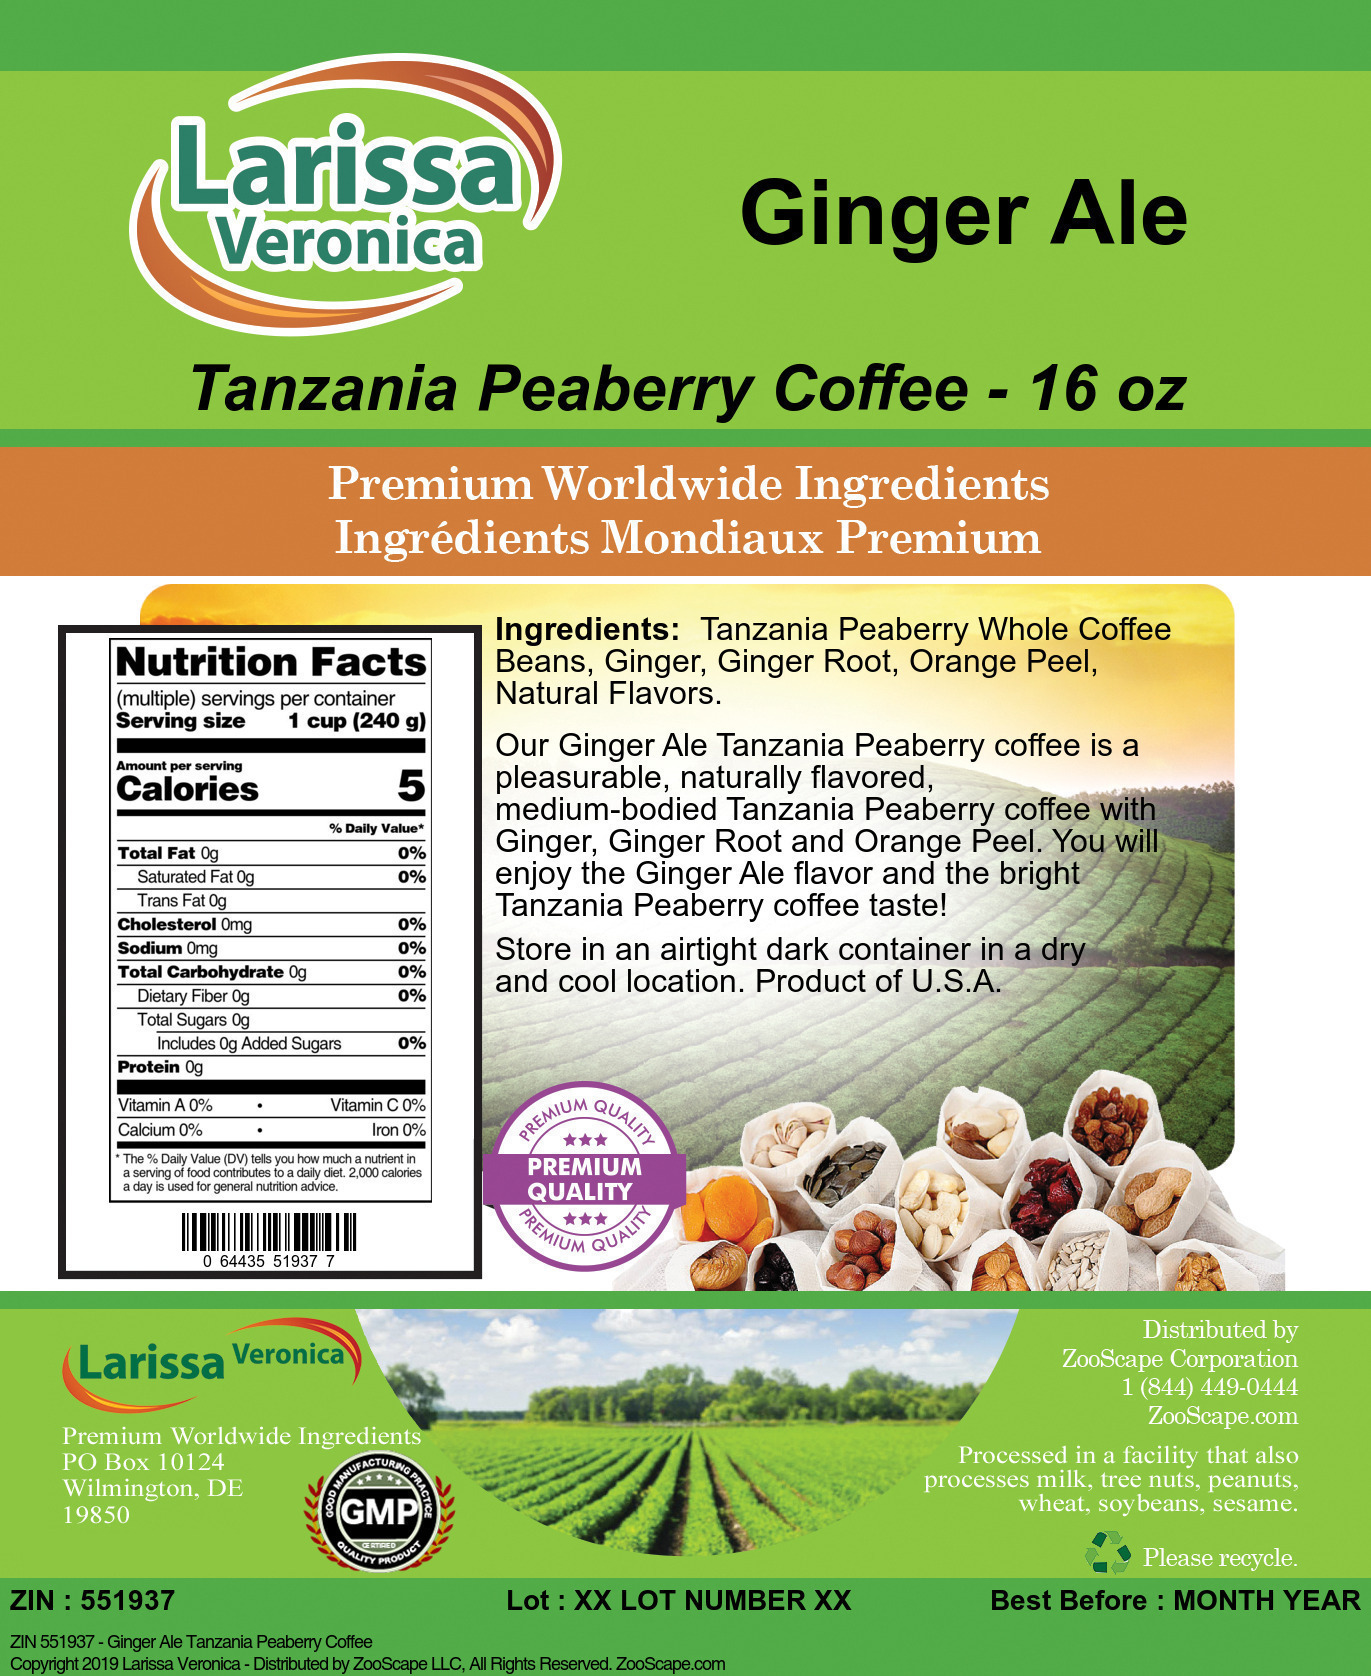 Ginger Ale Tanzania Peaberry Coffee - Label